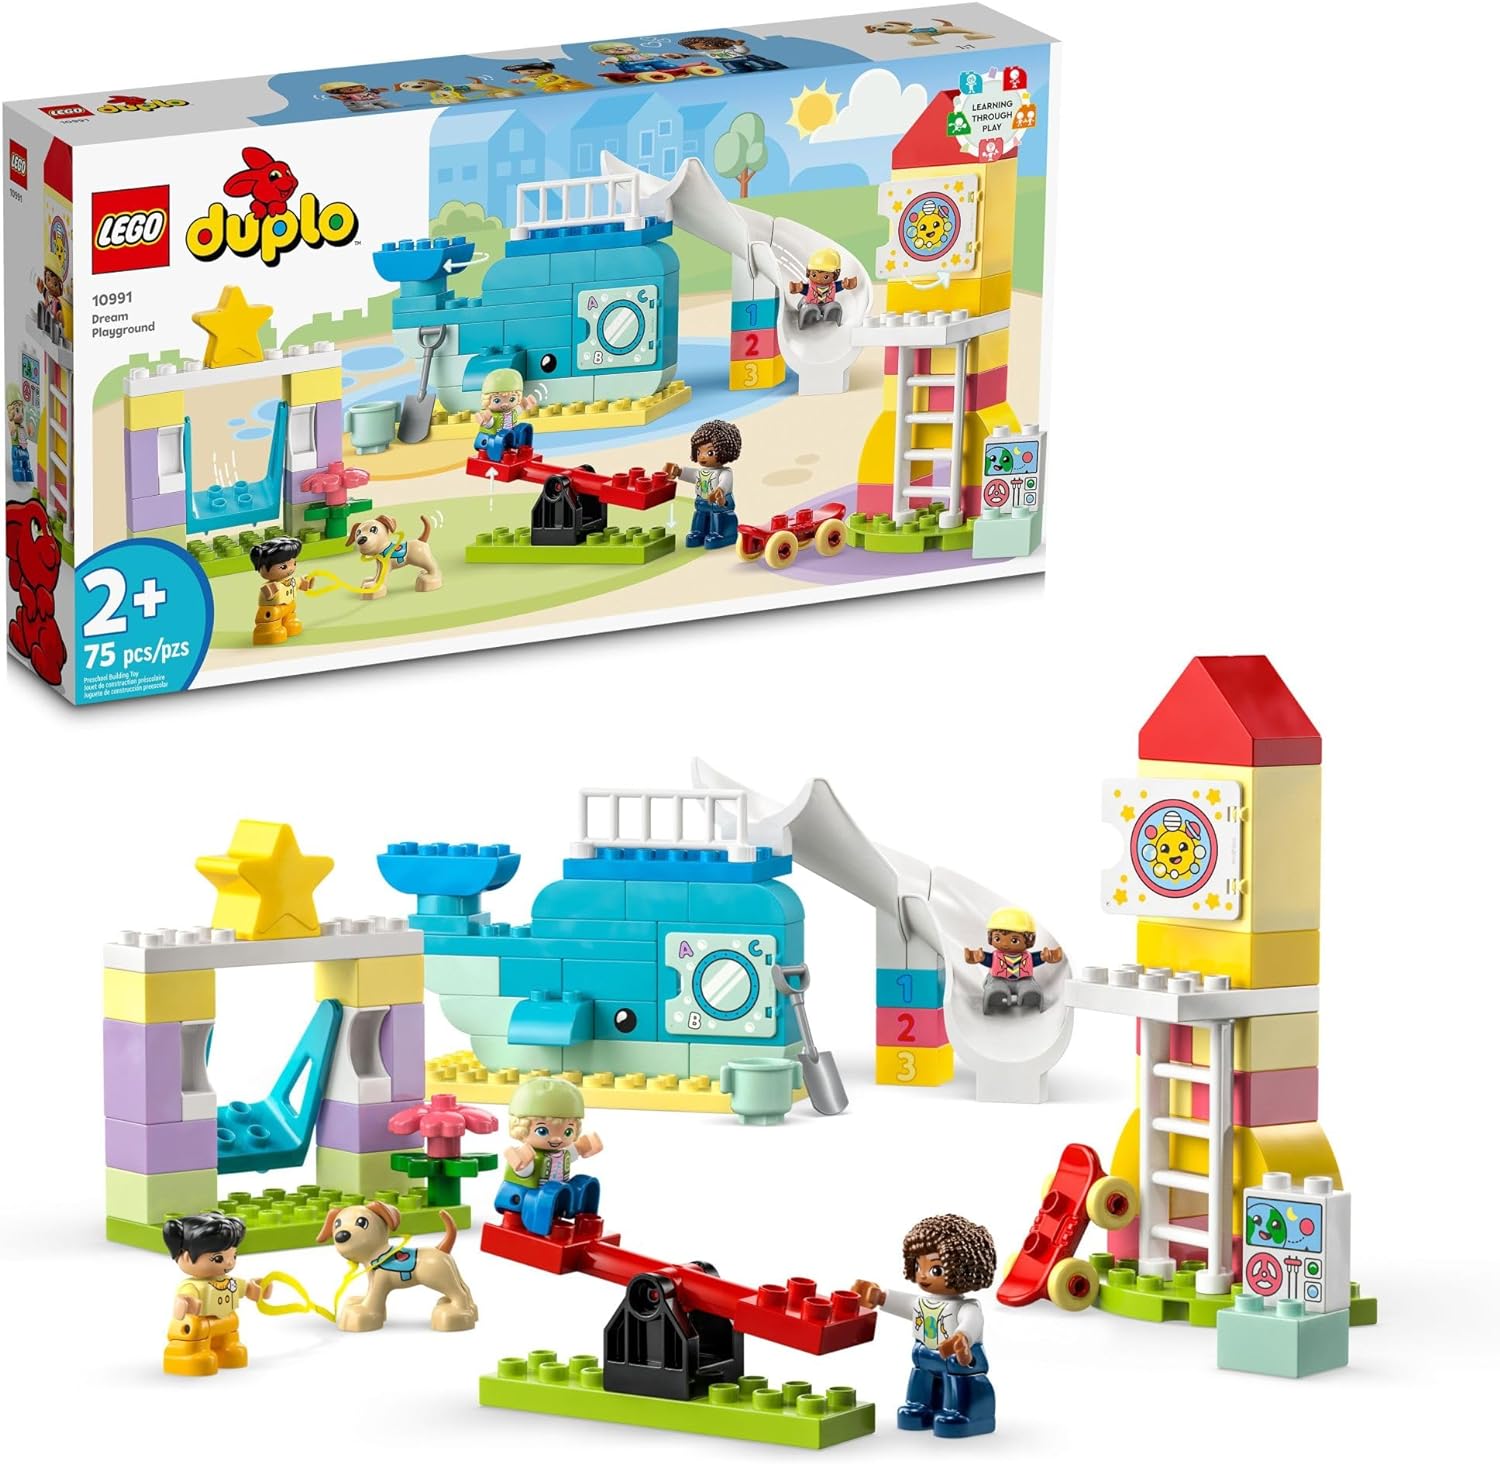 LEGO DUPLO Town Dream Playground 10991 Building Toy Set for Toddlers